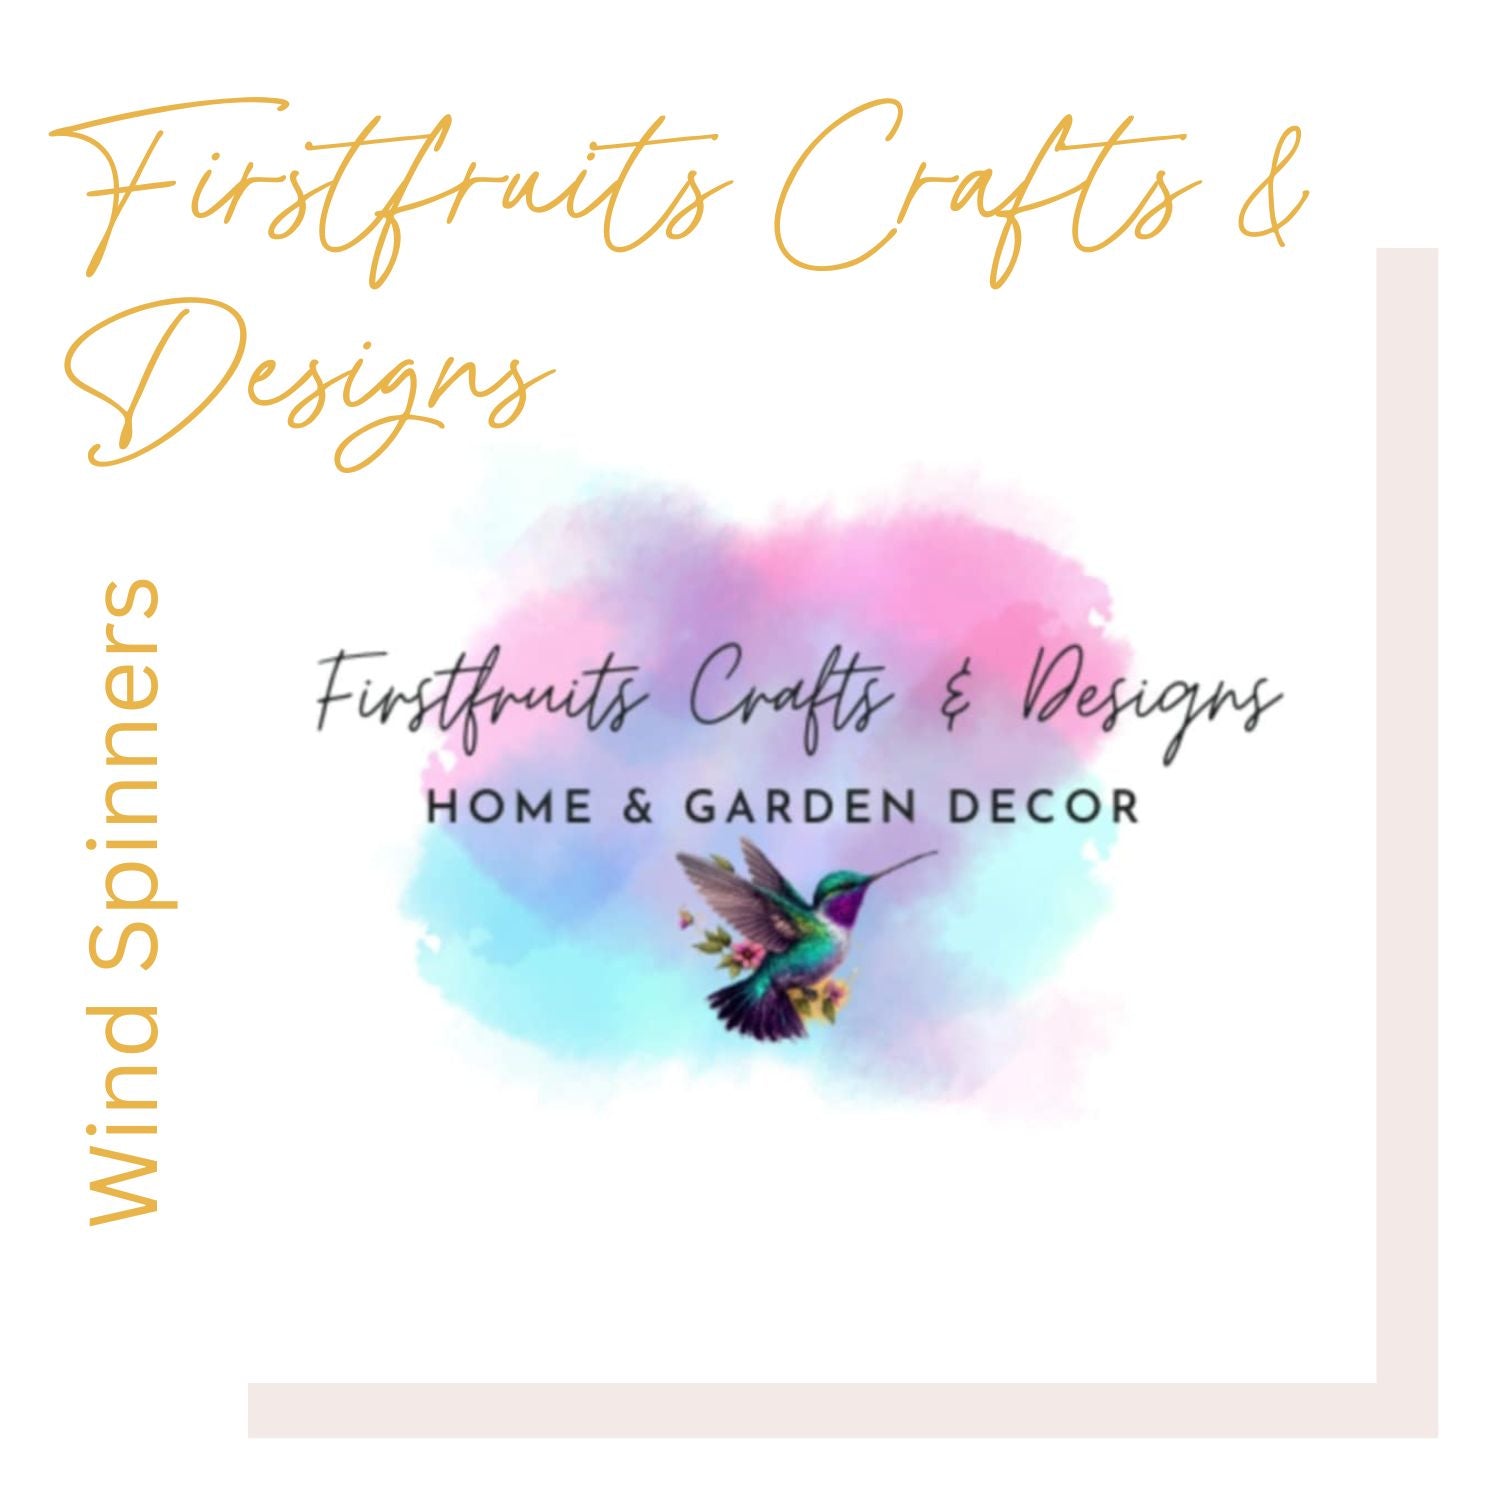 FirstFruits Crafts and Designs